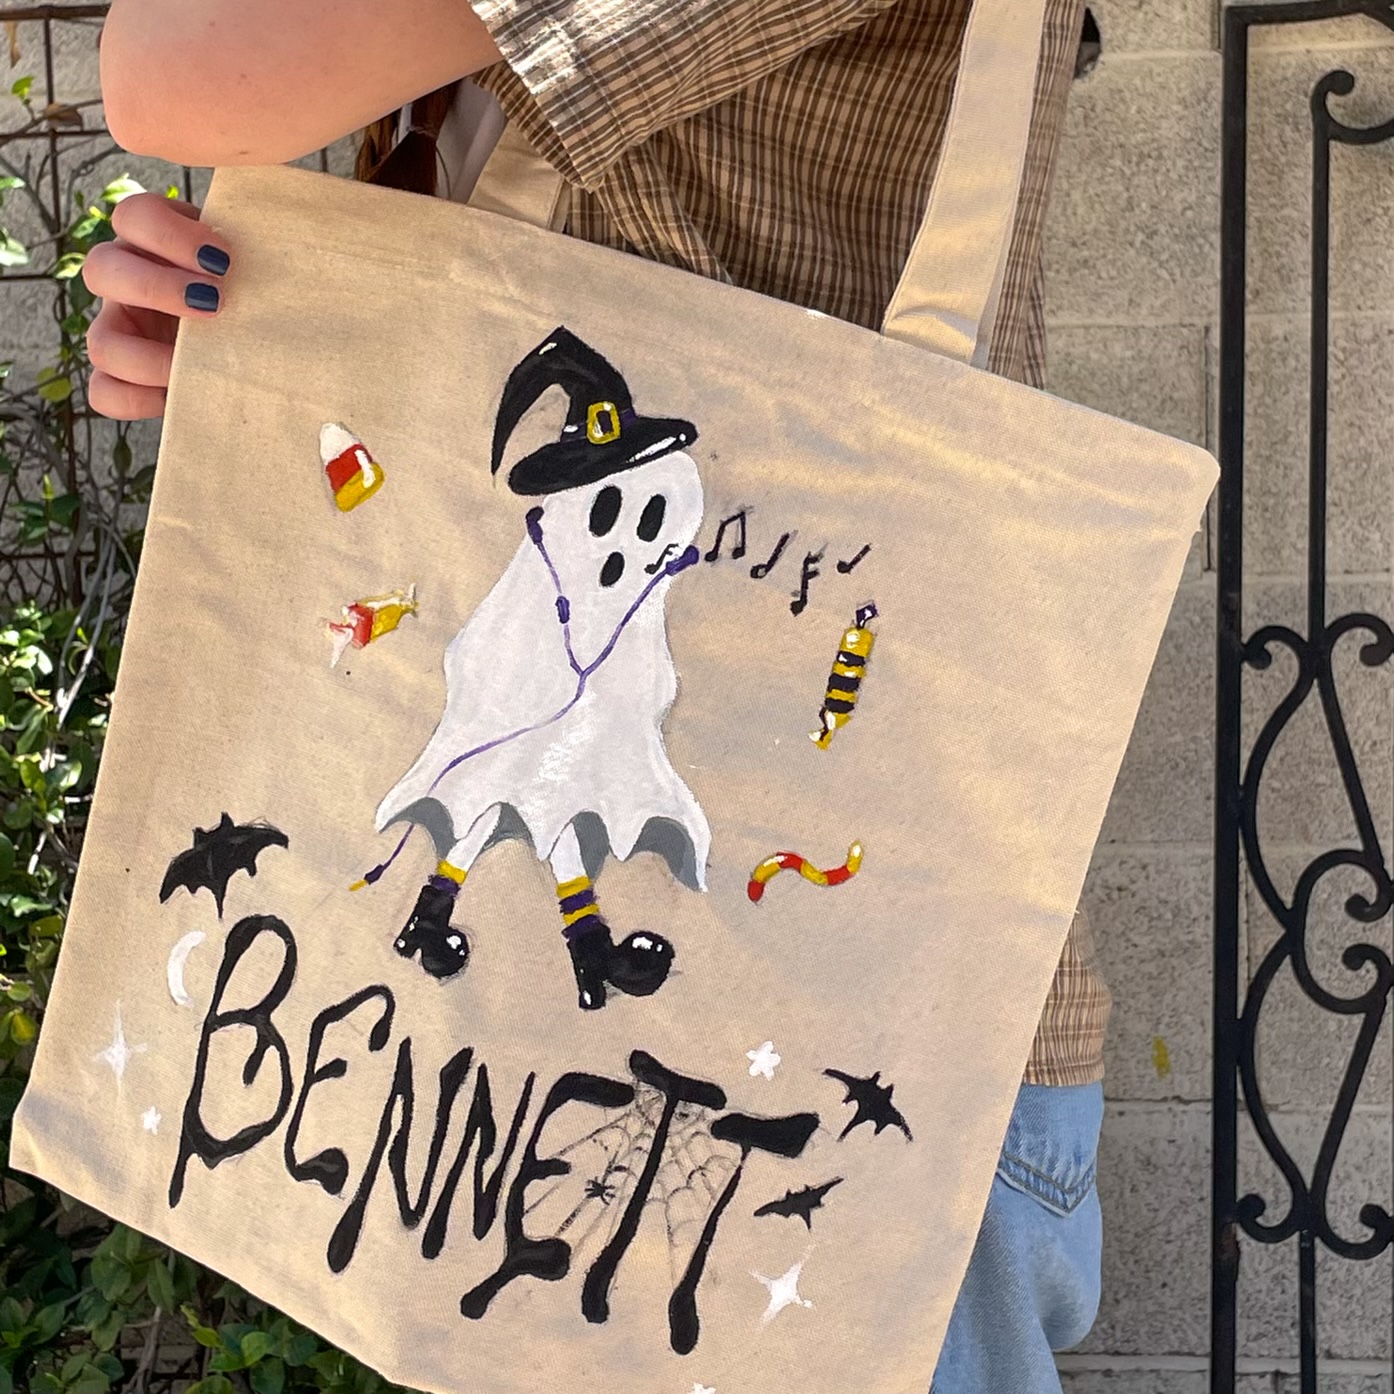 Paint Your Own Trick or Treat Bag! - Kids and Family Tote Bag Painting Event